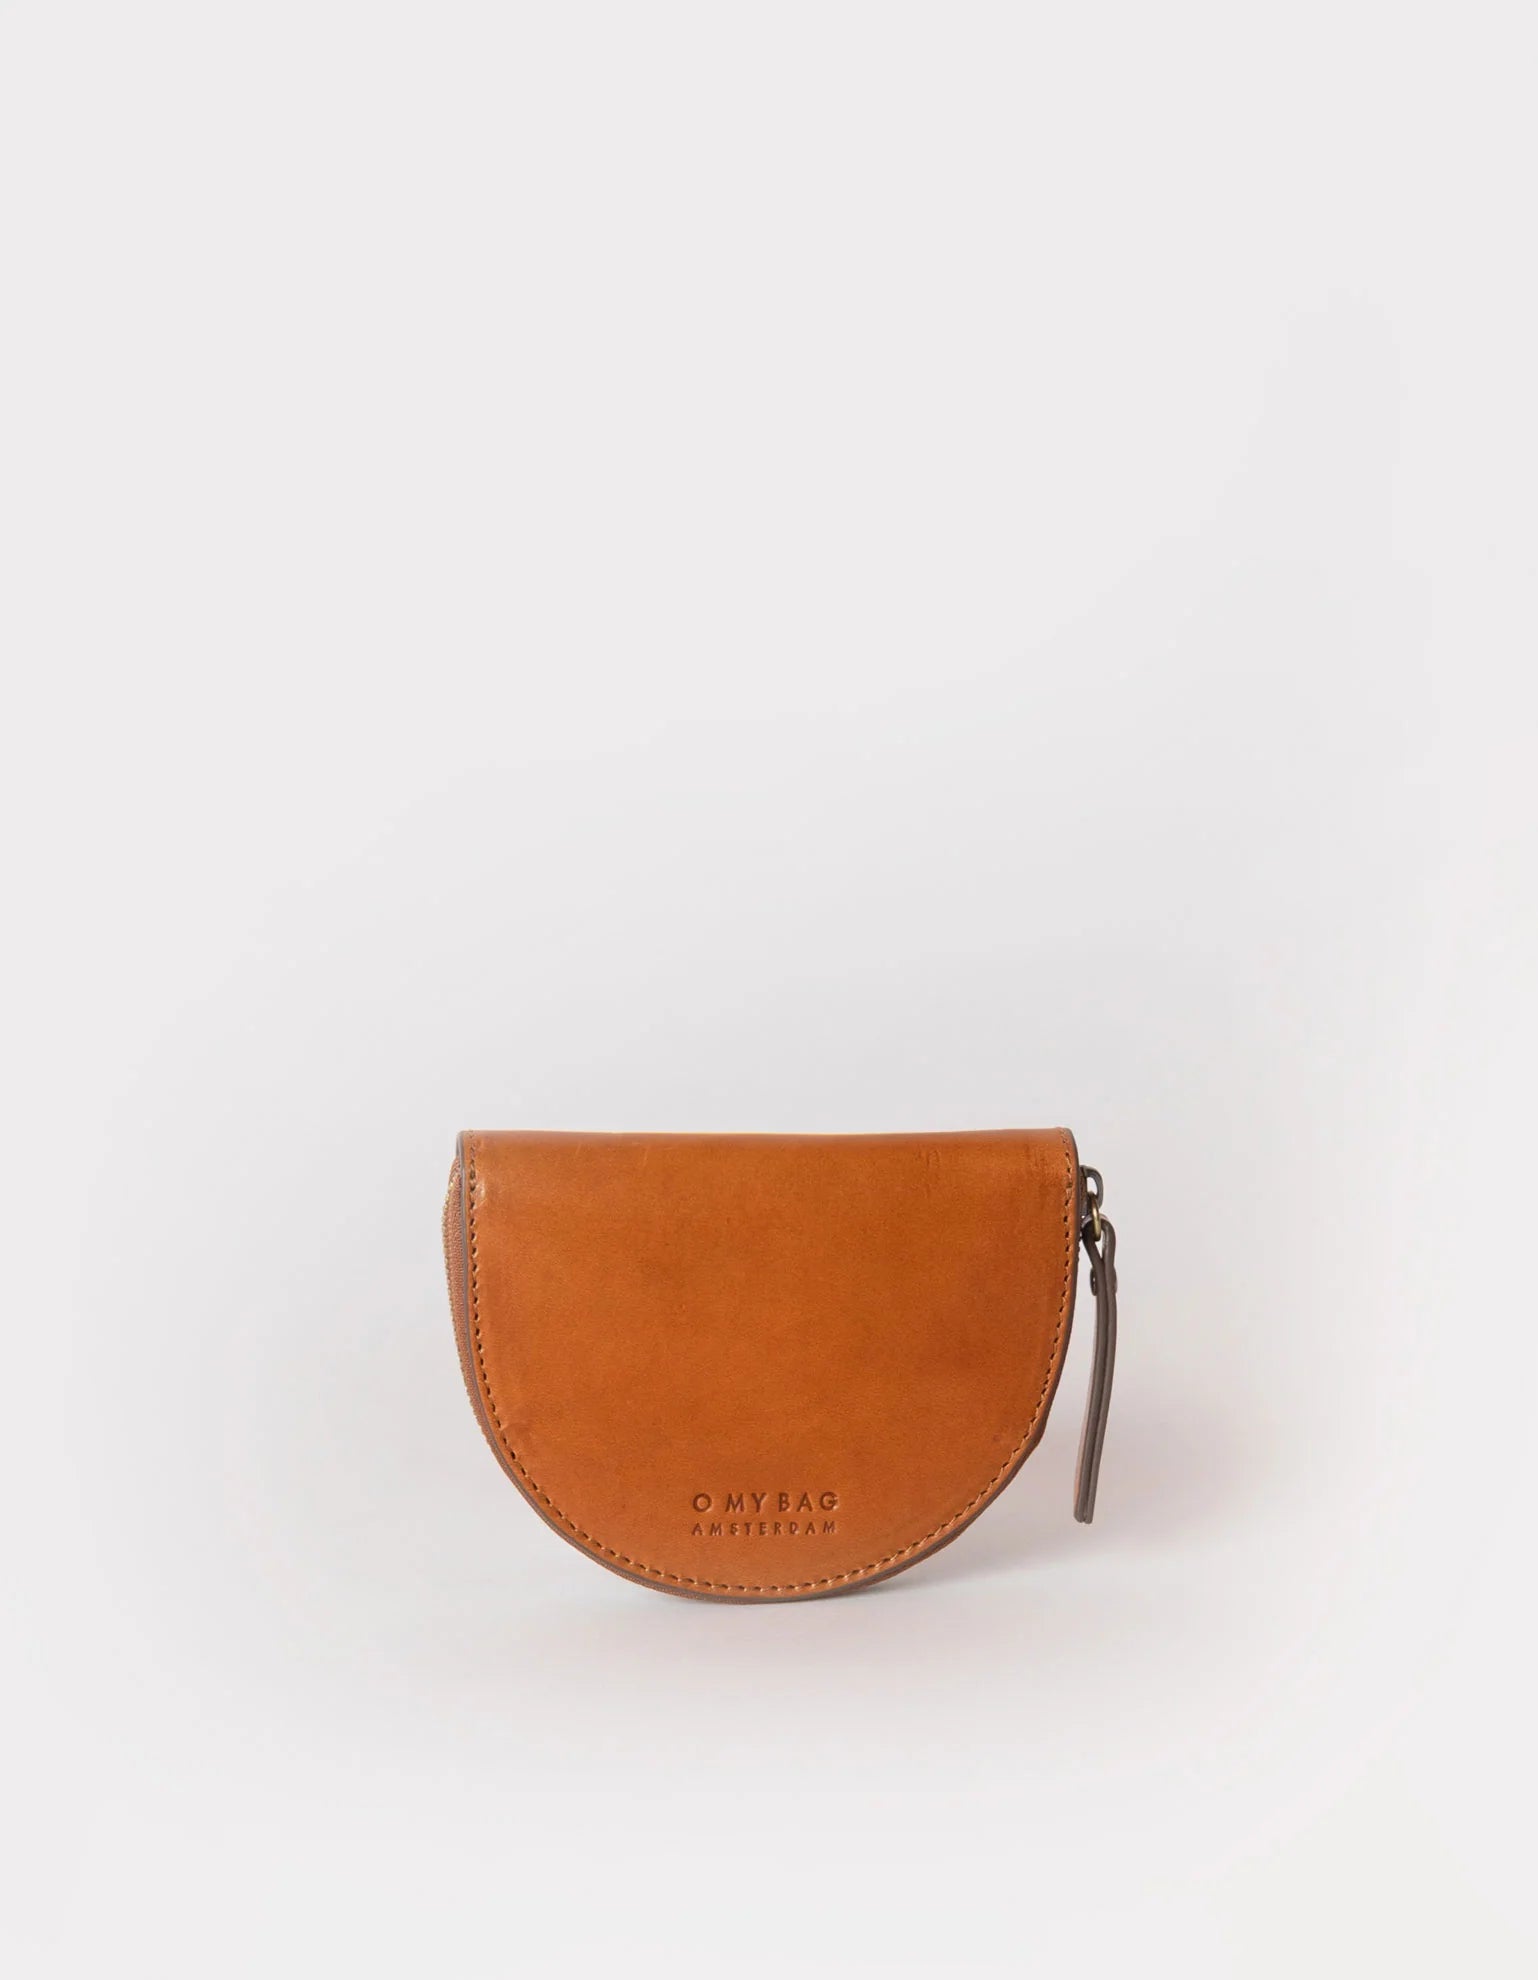 O My Bag  Laura Sustainable Leather Coin Purse - Cognac Classic